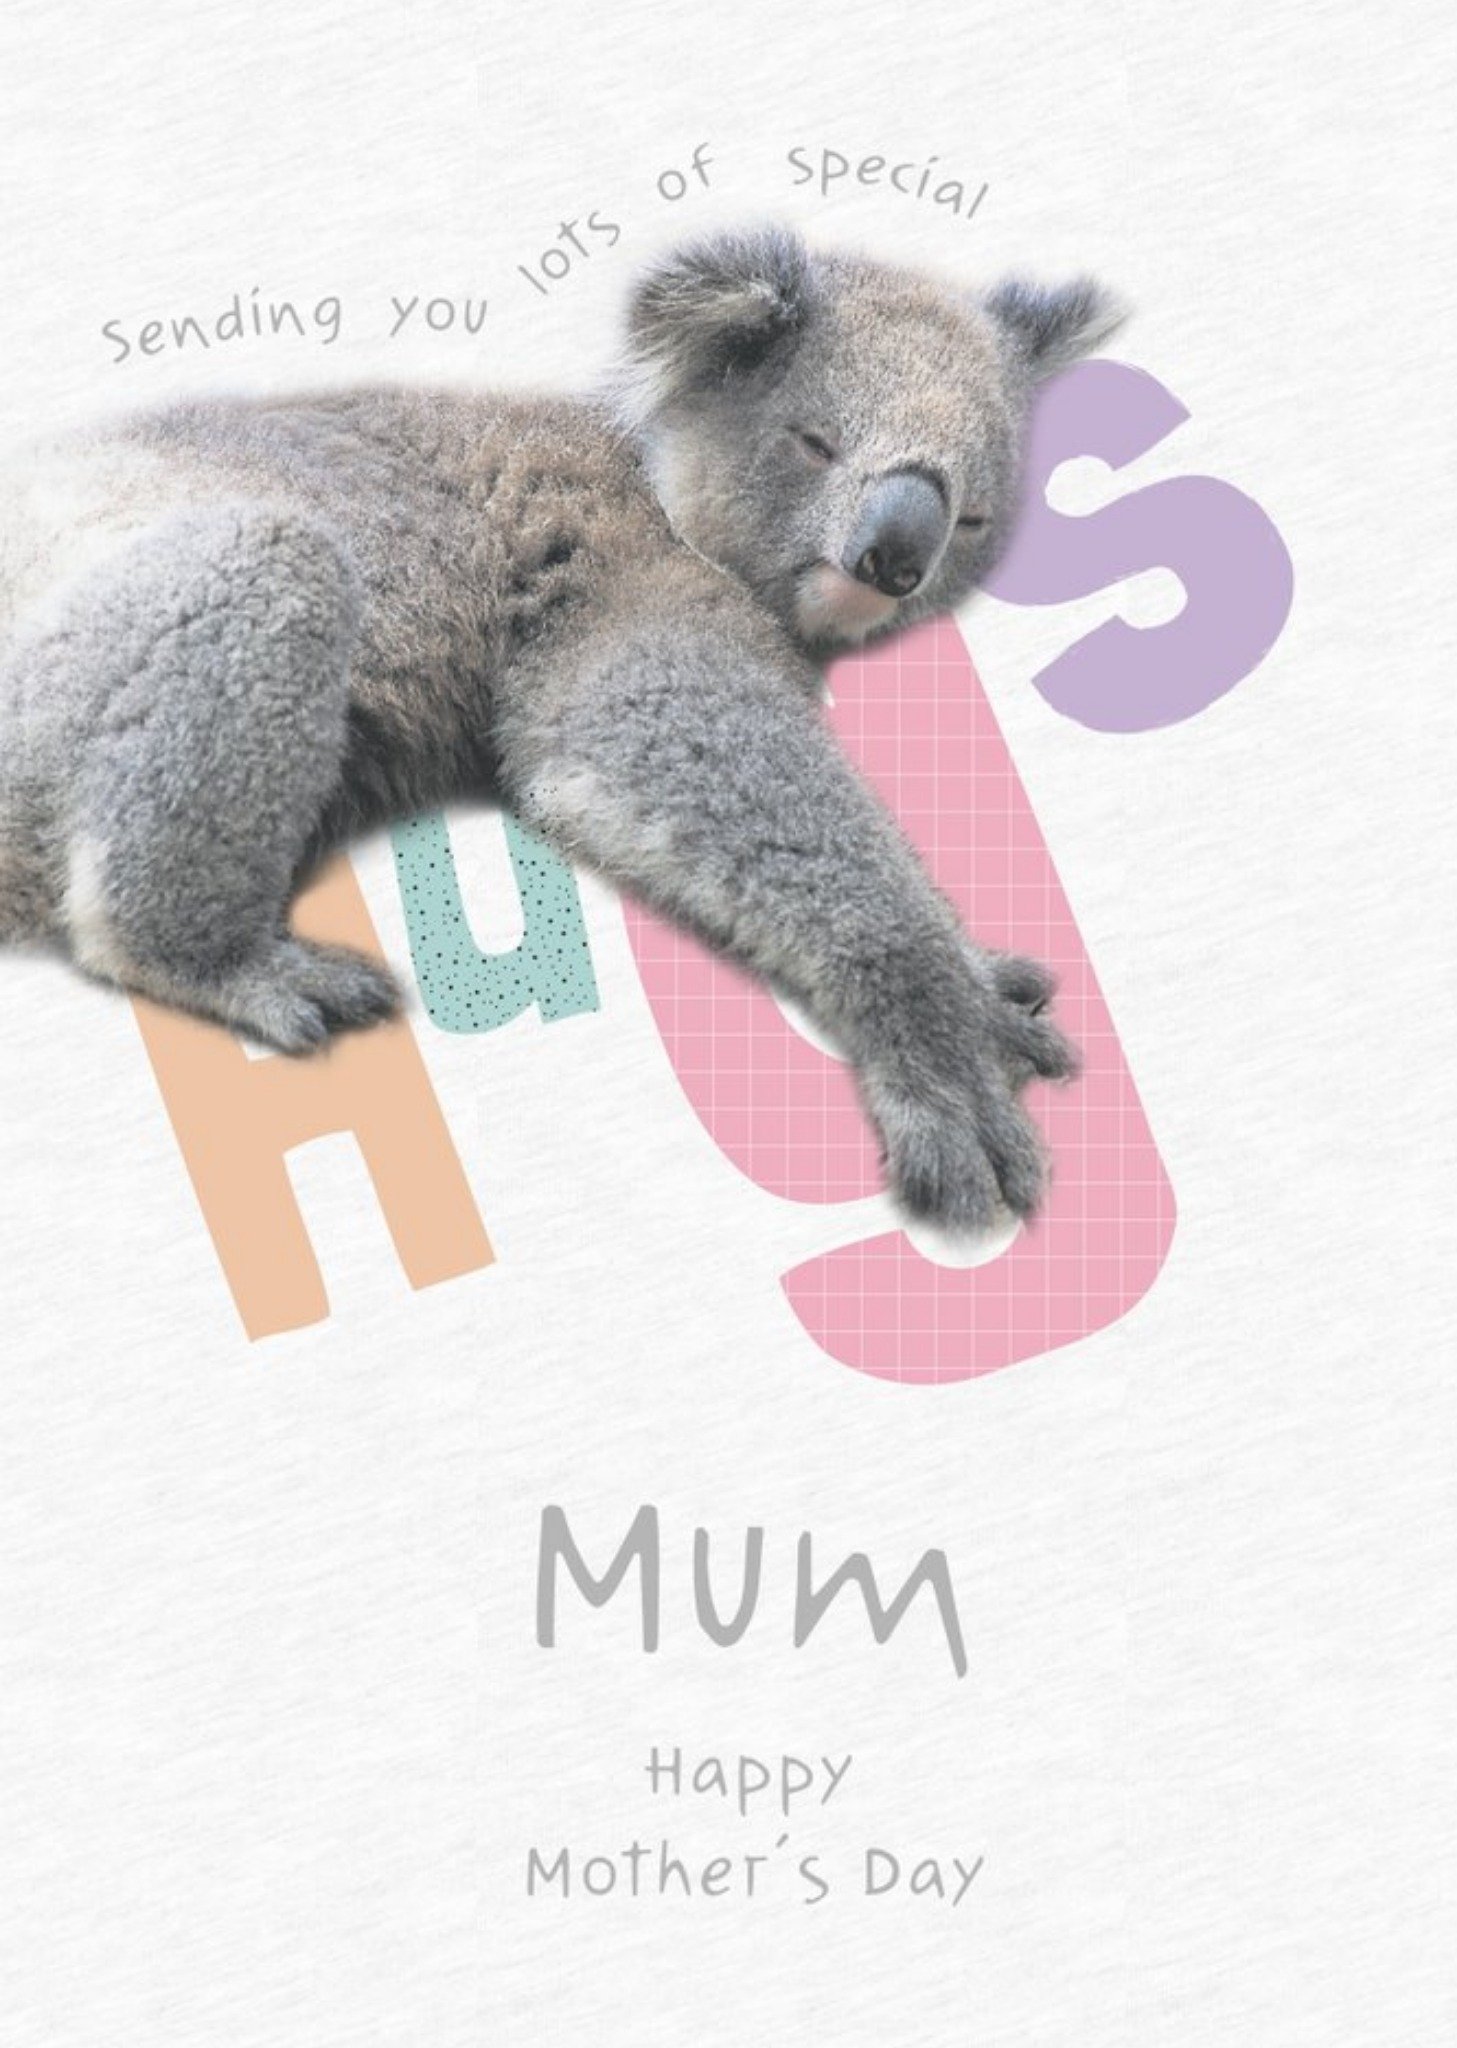 Moonpig Animal Planet Sending You Lots Of Special Hugs Koala Mother's Day Card, Large